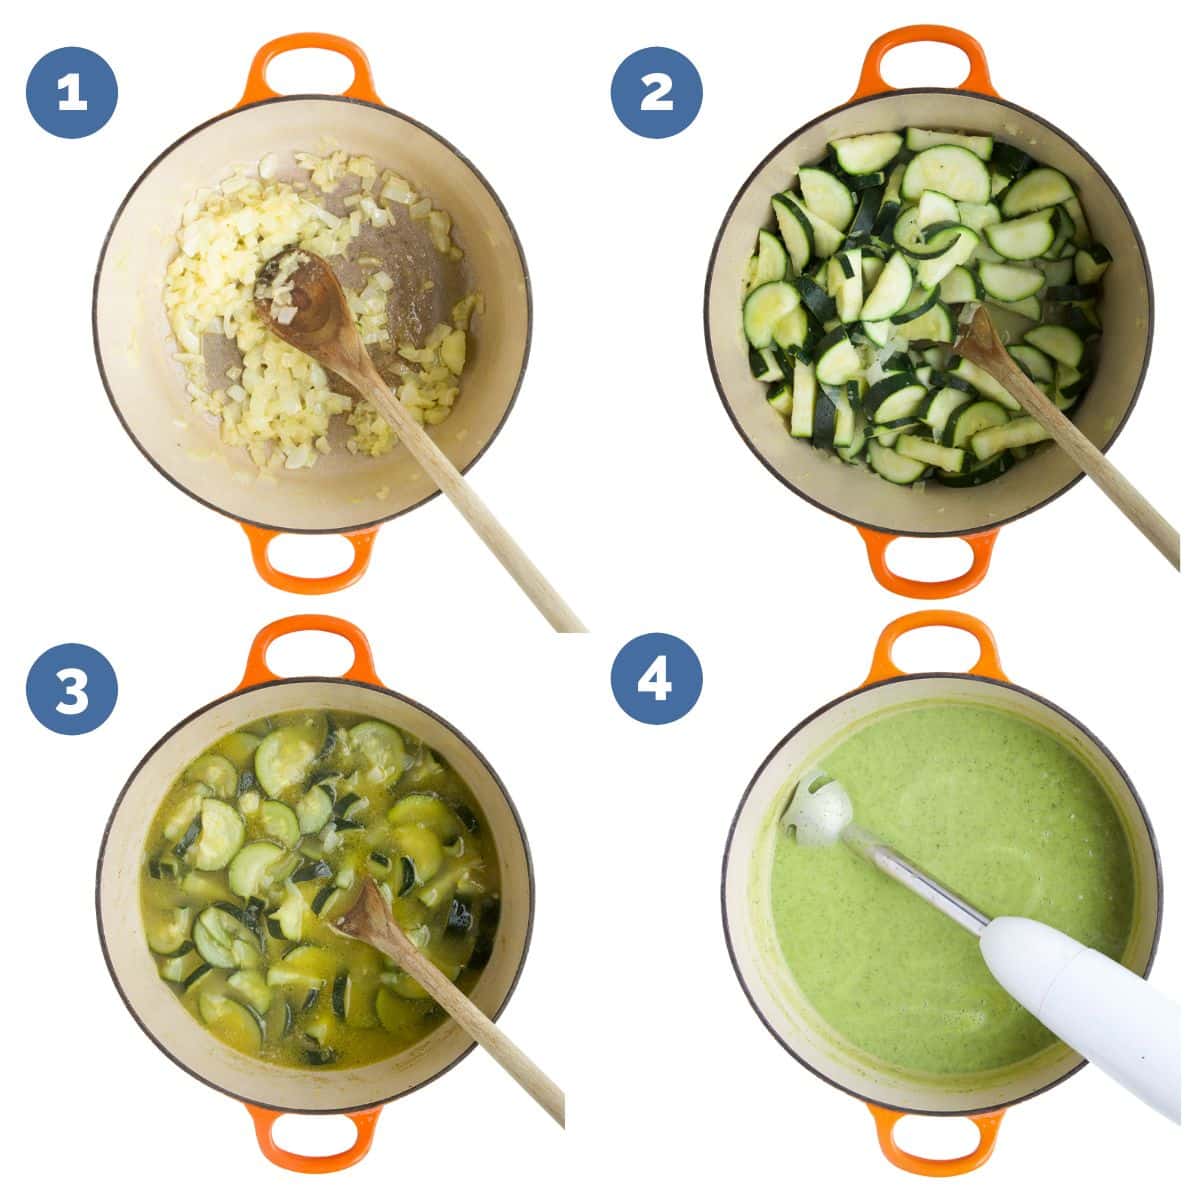 Collage of 4 Images Showing How to Make Courgette Soup. Saute Onion, Sweat Courgettes, Add Stock and Simmer, Blend.